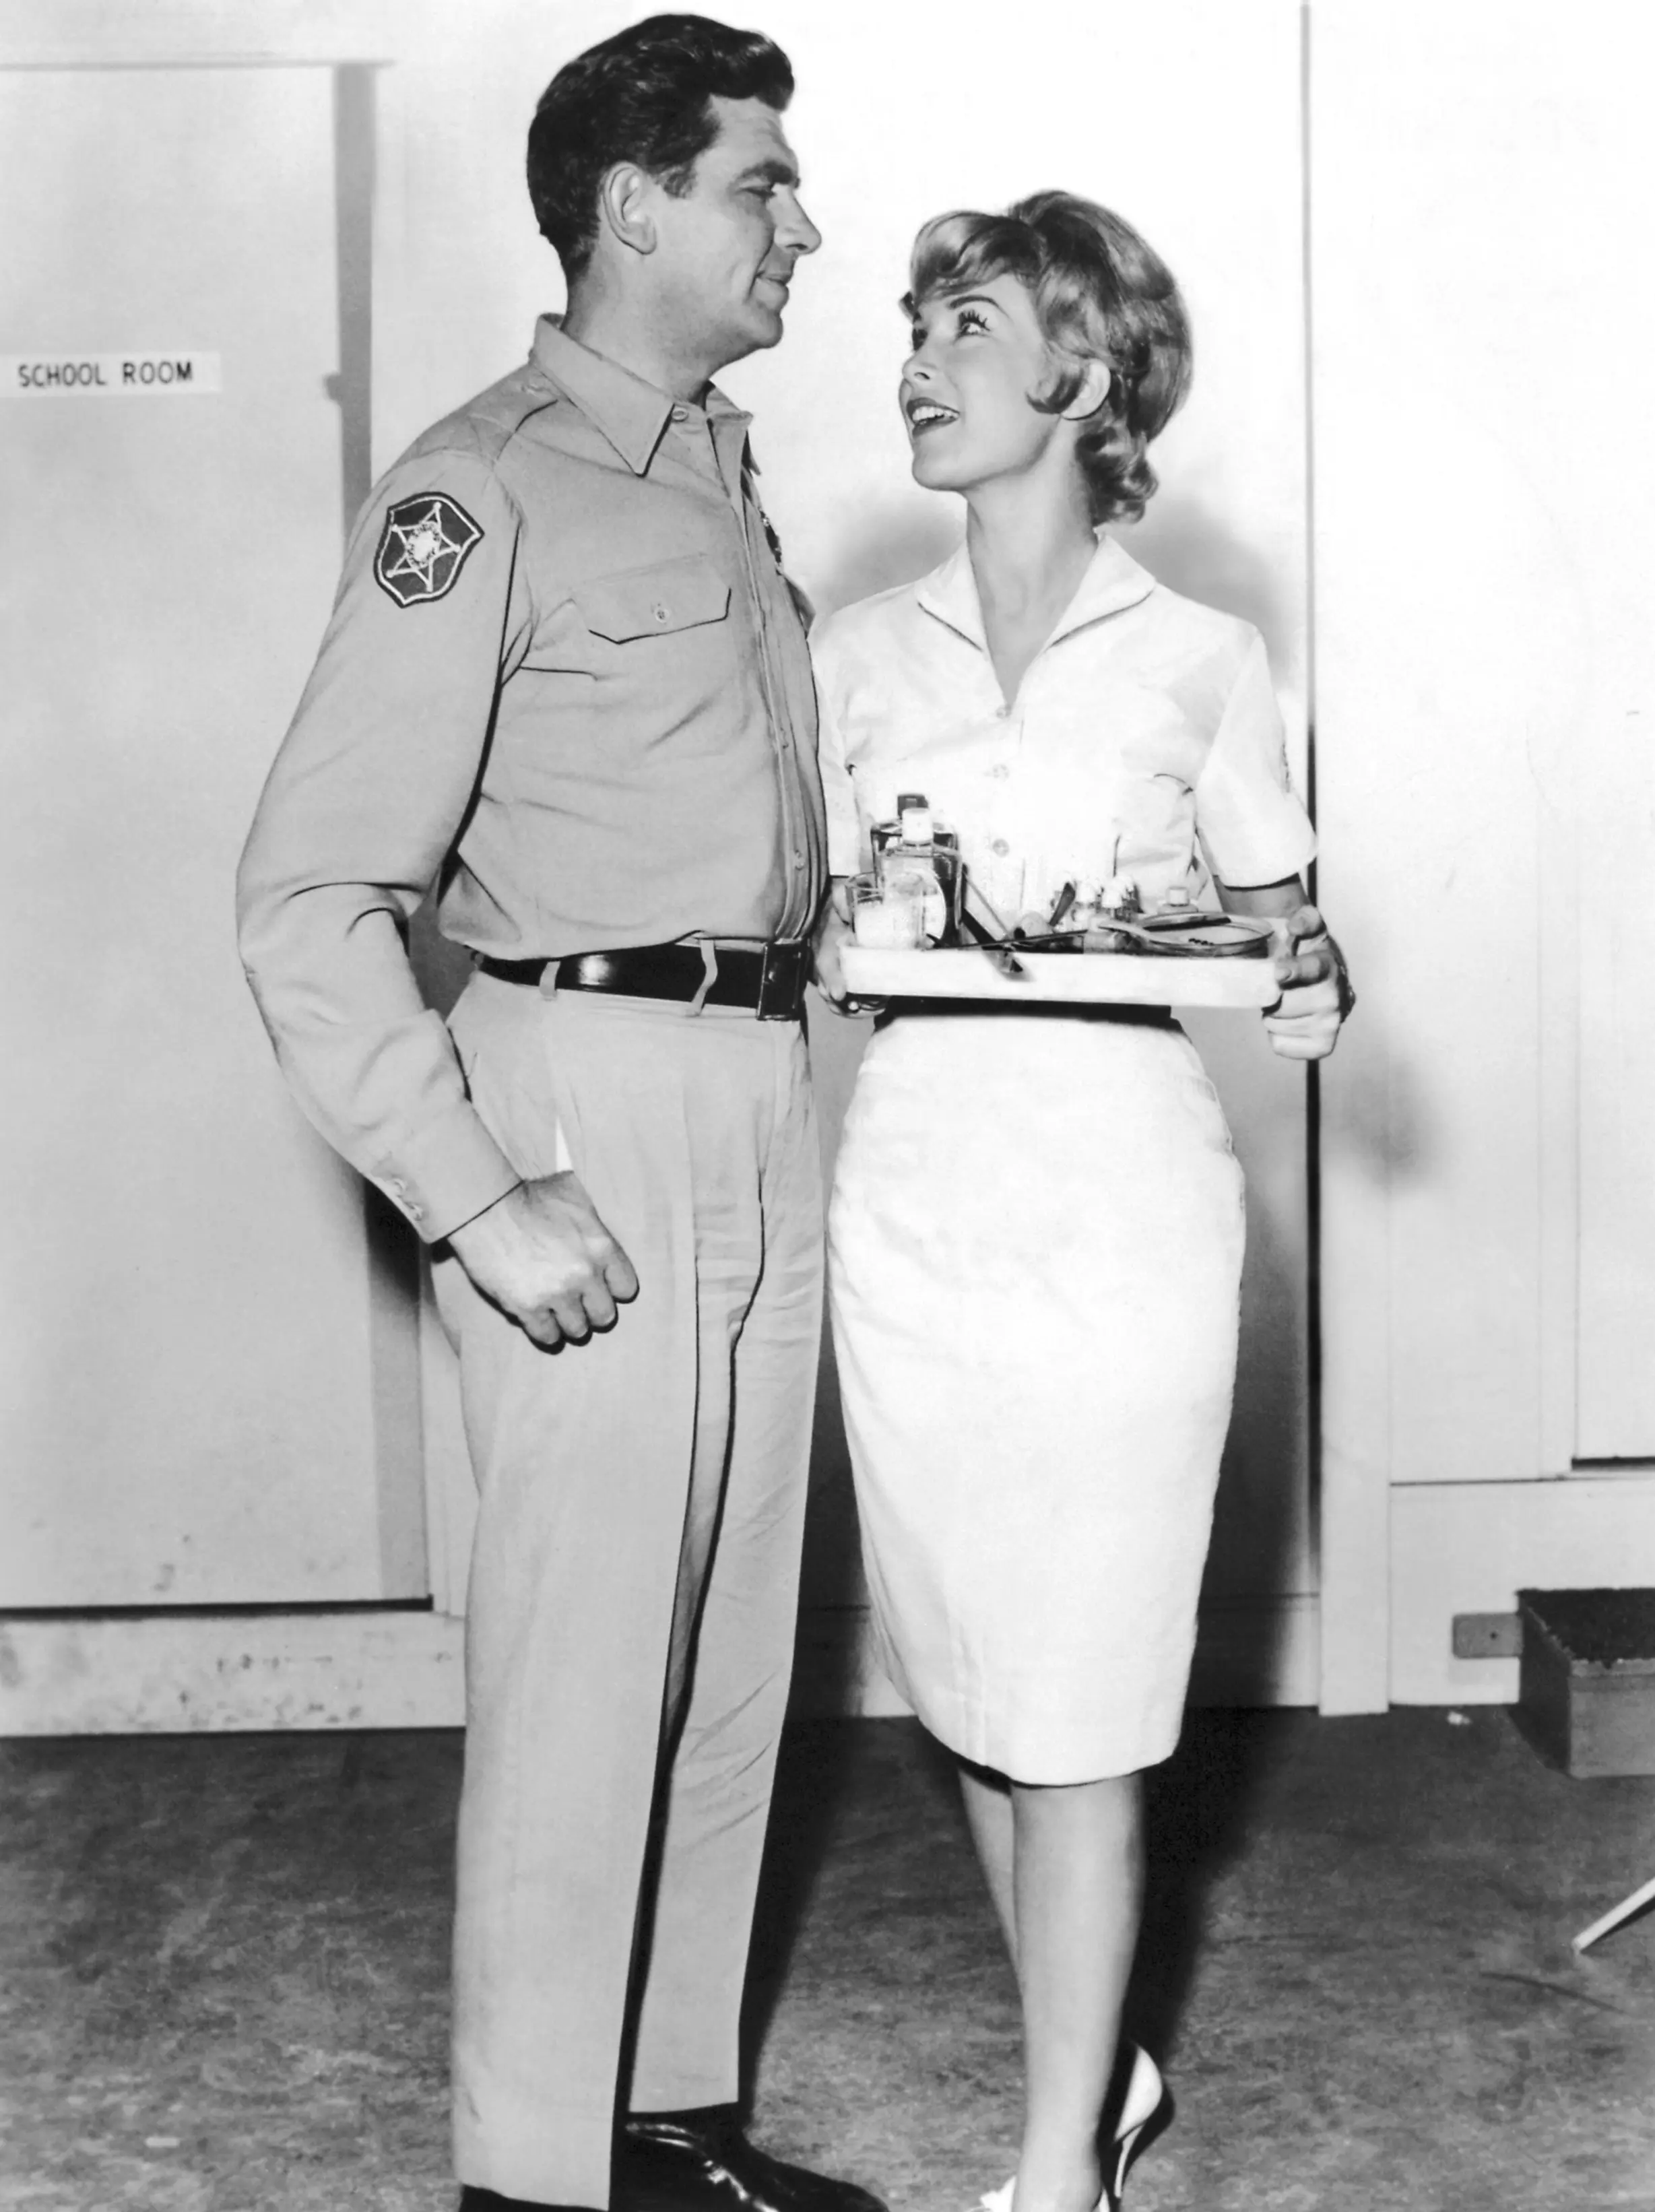 THE ANDY GRIFFITH SHOW, Andy Griffith, Barbara Eden, 'The Manicurist'